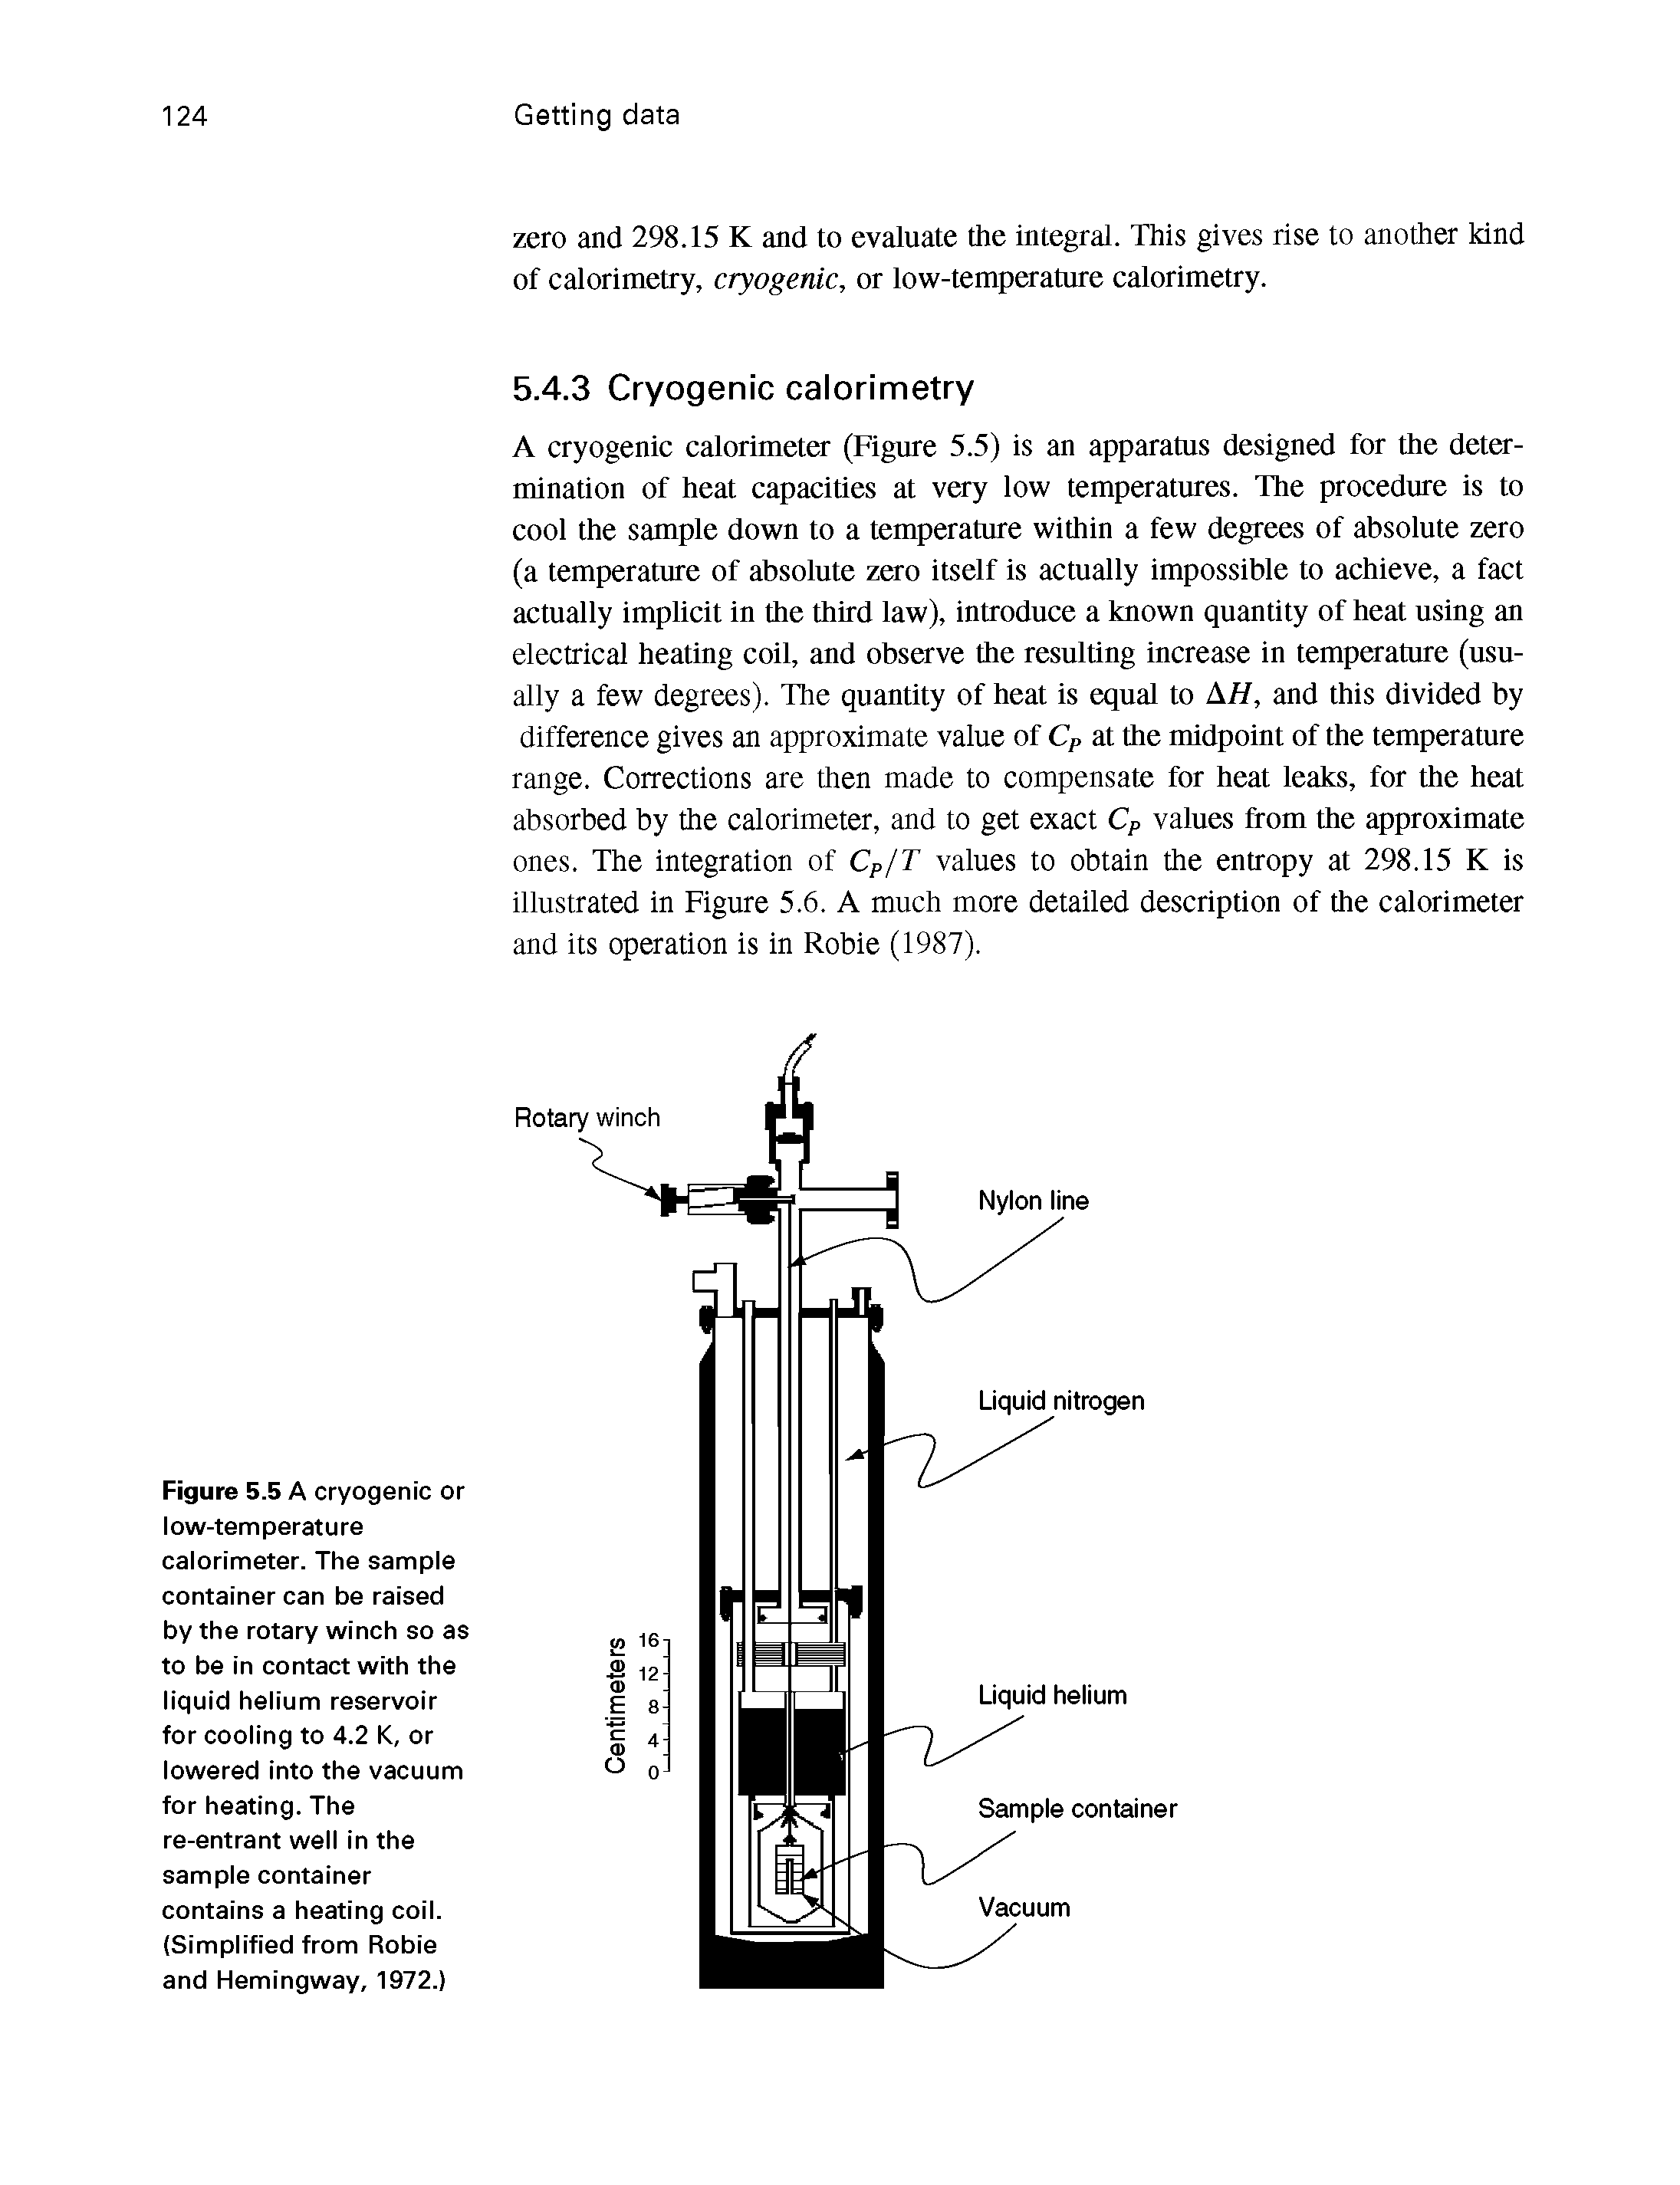 Figure 5.5 A cryogenic or low-temperature calorimeter. The sample container can be raised by the rotary winch so as to be in contact with the liquid helium reservoir for cooling to 4.2 K, or lowered into the vacuum for heating. The re-entrant well in the sample container contains a heating coil. (Simplified from Robie and Hemingway, 1972.)...